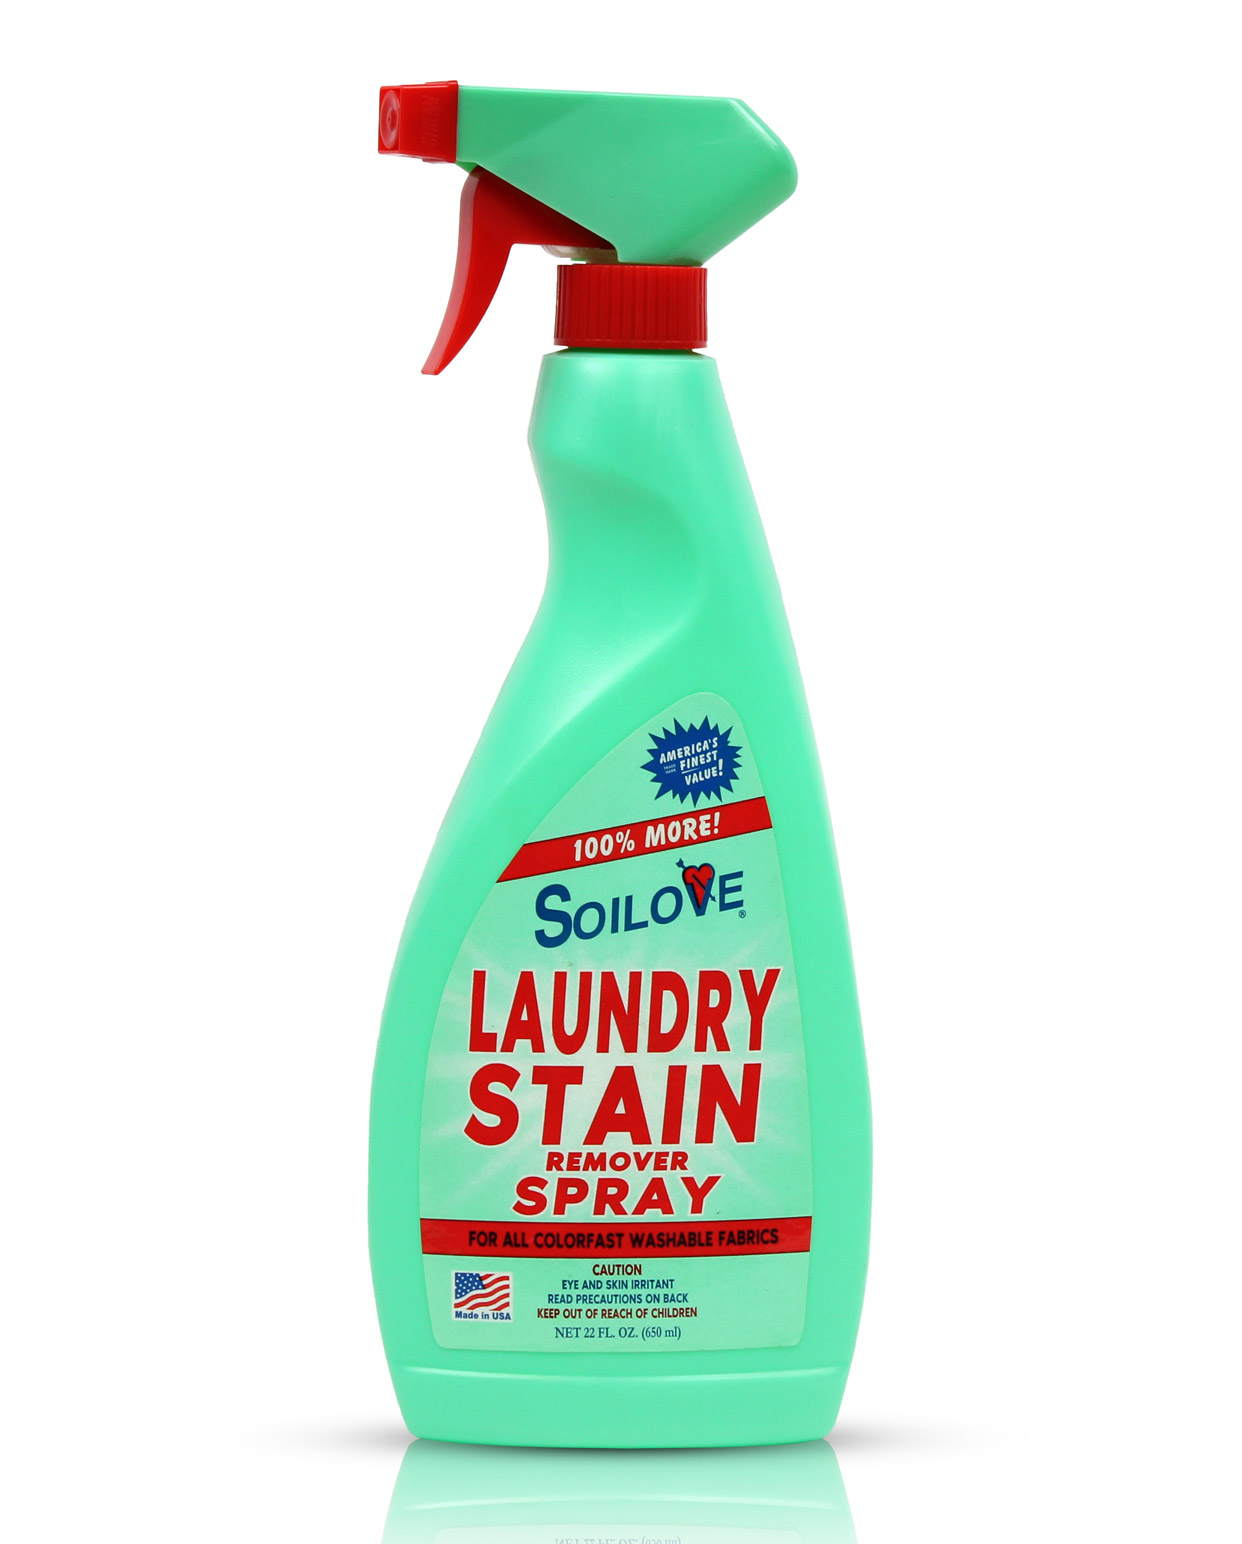 22oz bottle of Laundry Stain Remover Spray with a clear label displaying the brand name.